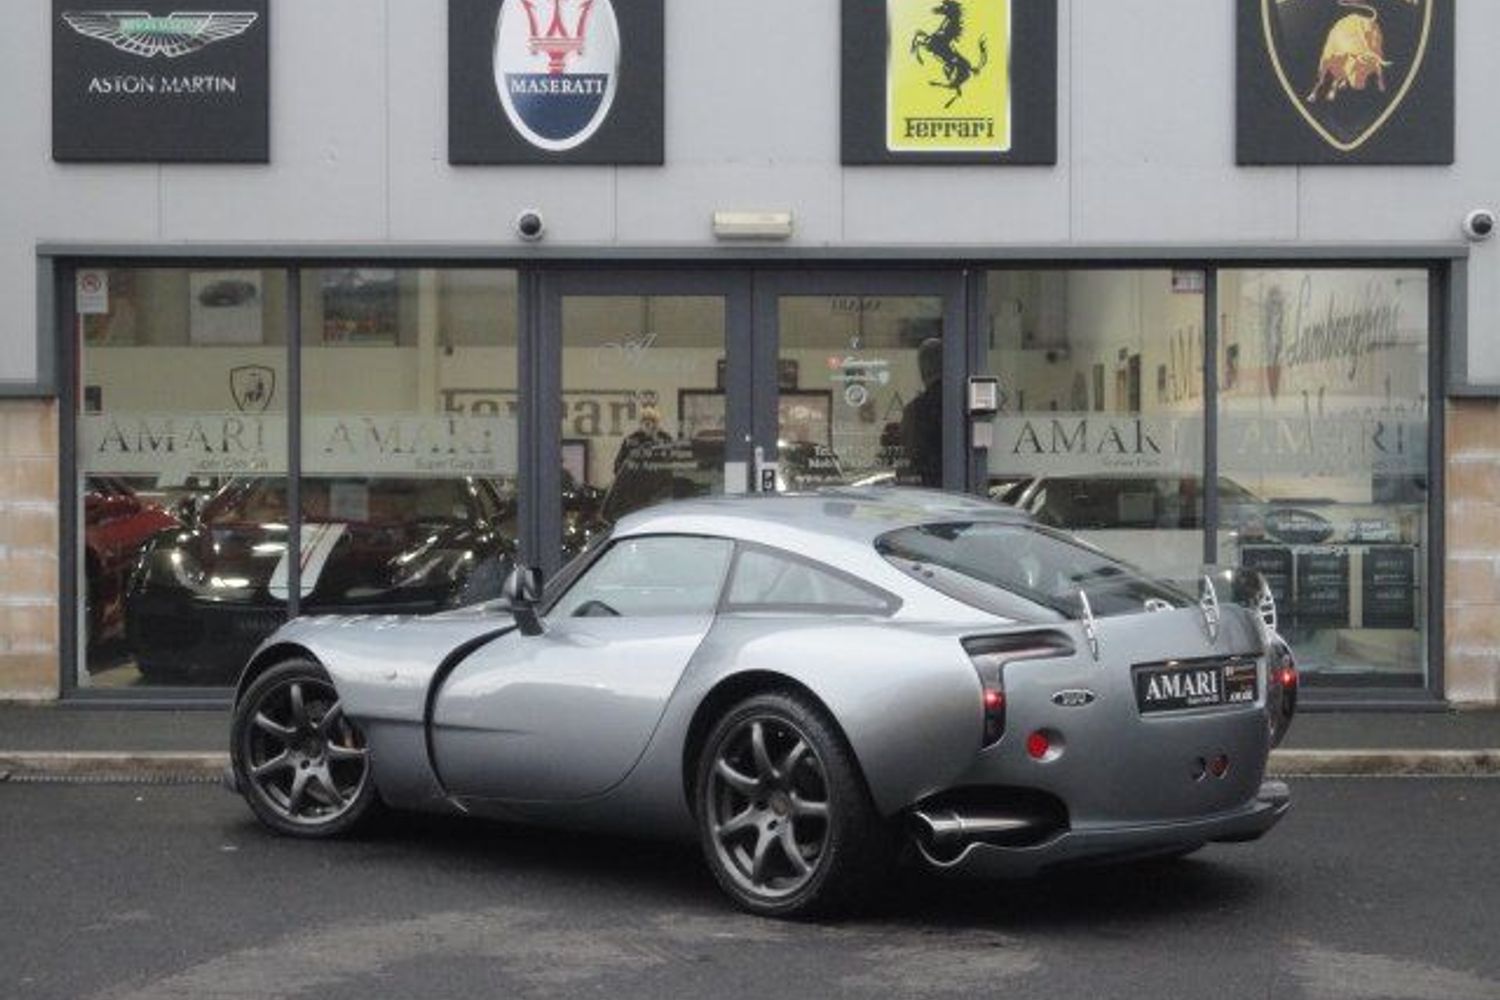 TVR Sagaris (Straight-six Sagaris is the extreme face of TVR)